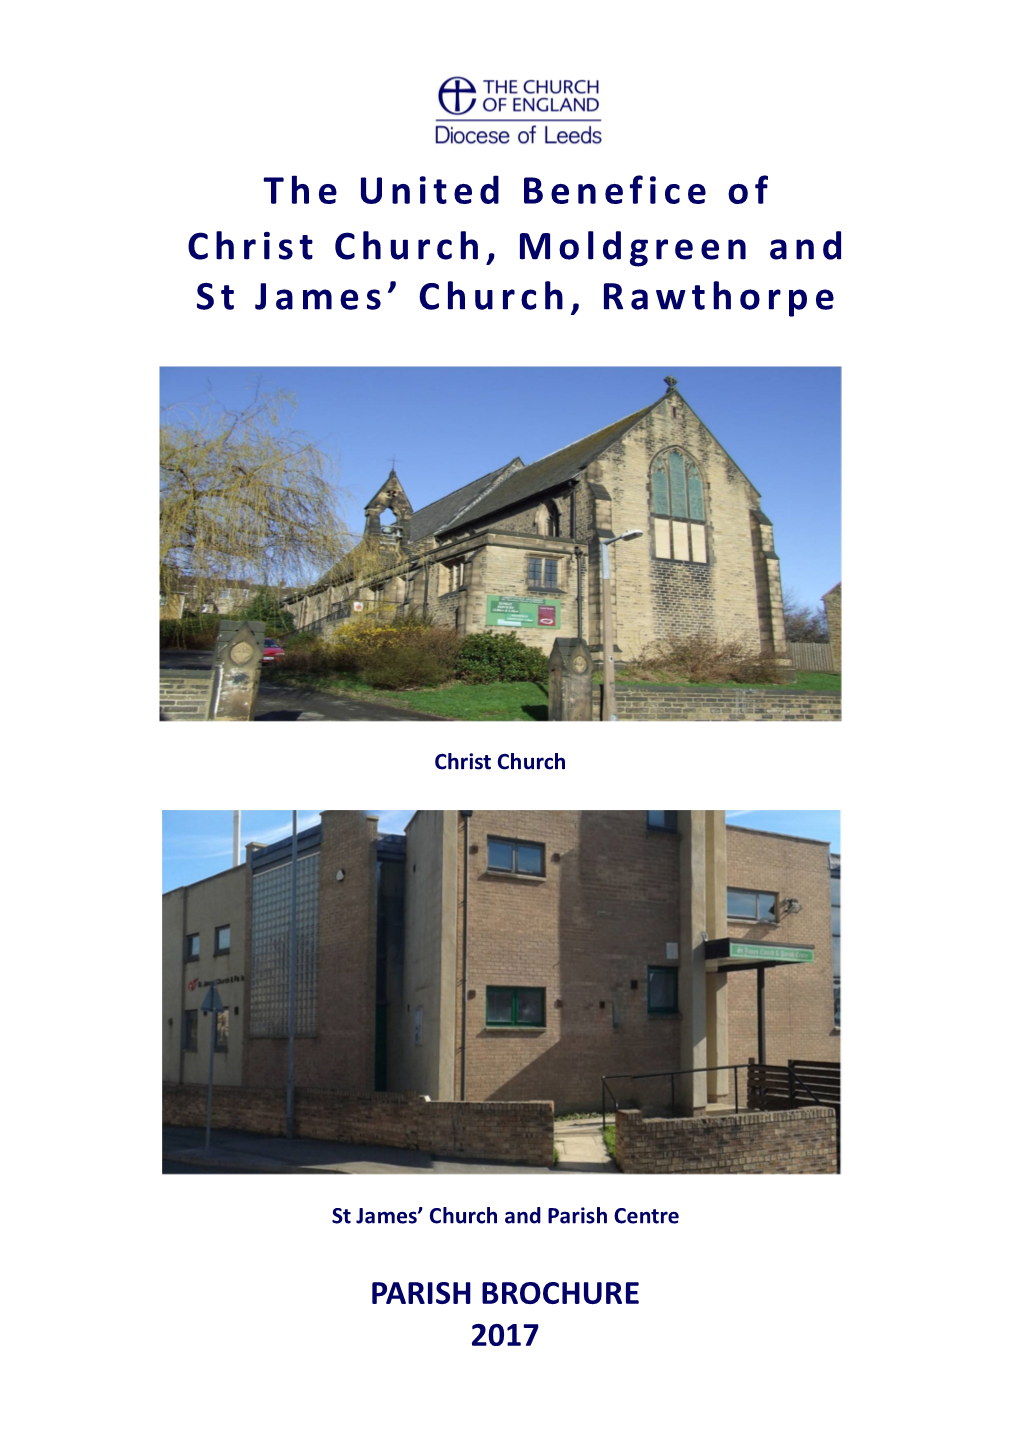 The United Benefice of Christ Church, Moldgreen and S T J a Me S ’ Church, Rawthorpe